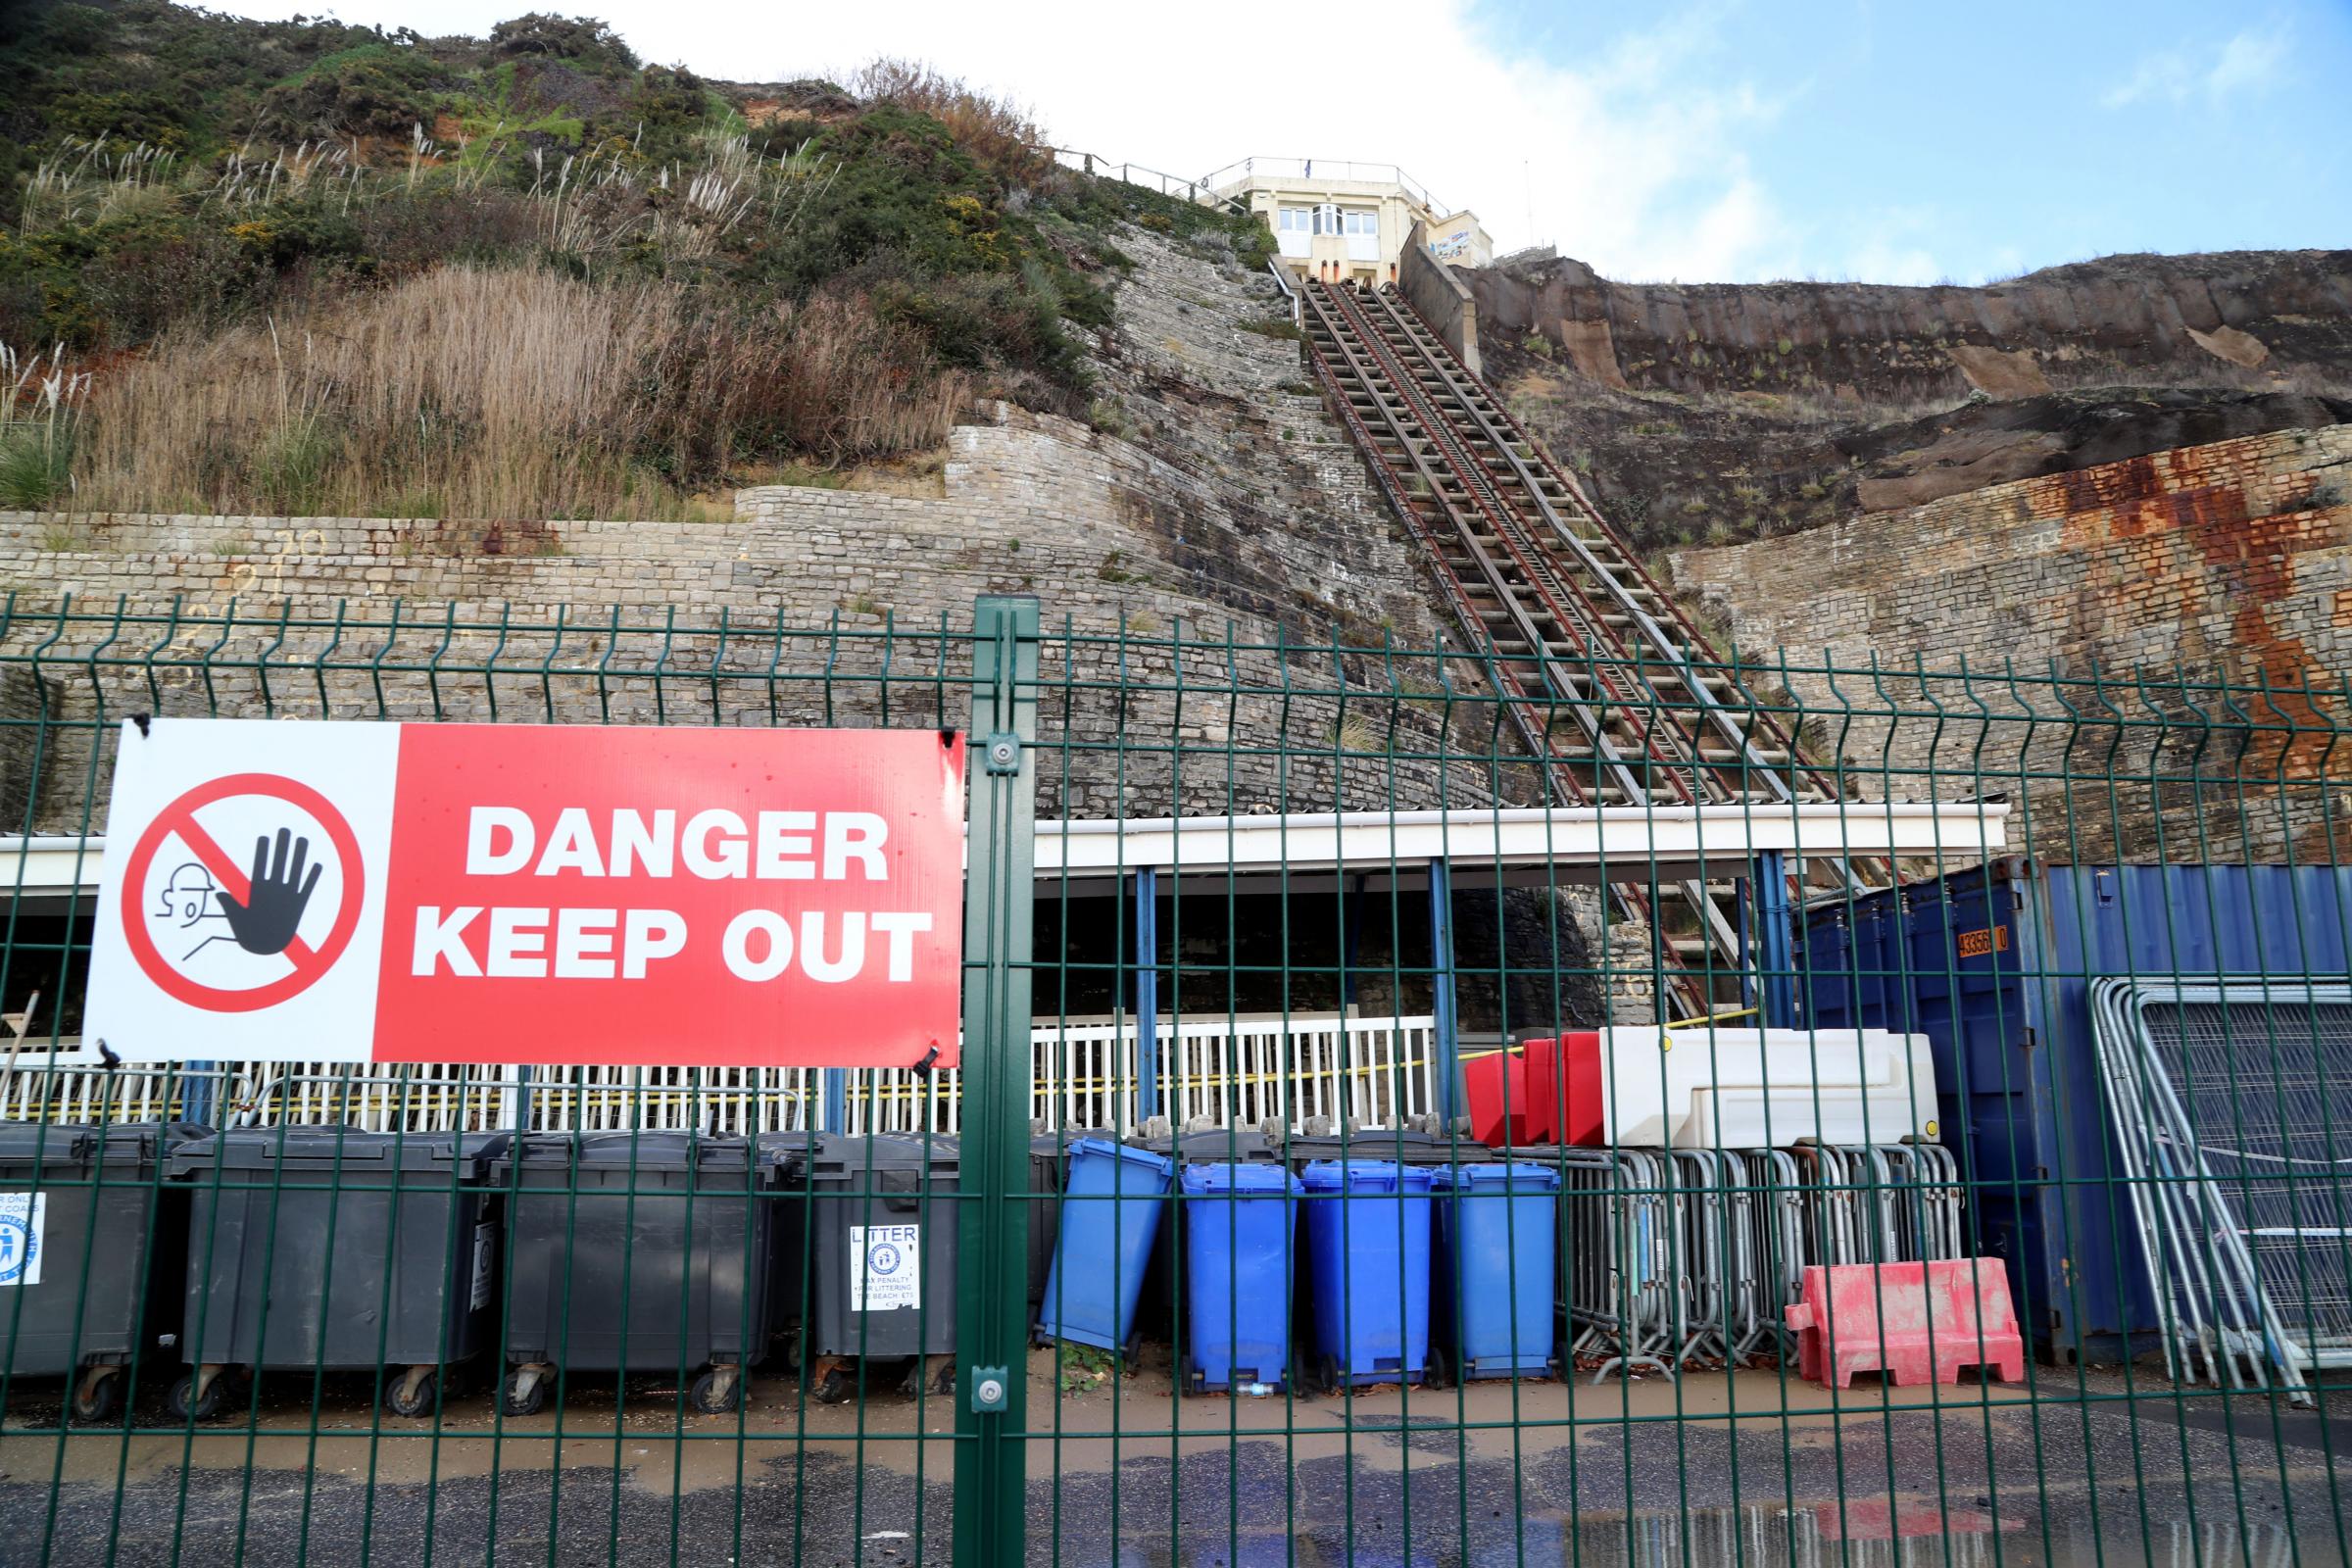 Meyrick Estate 'will support council' over repairs to cliff lift